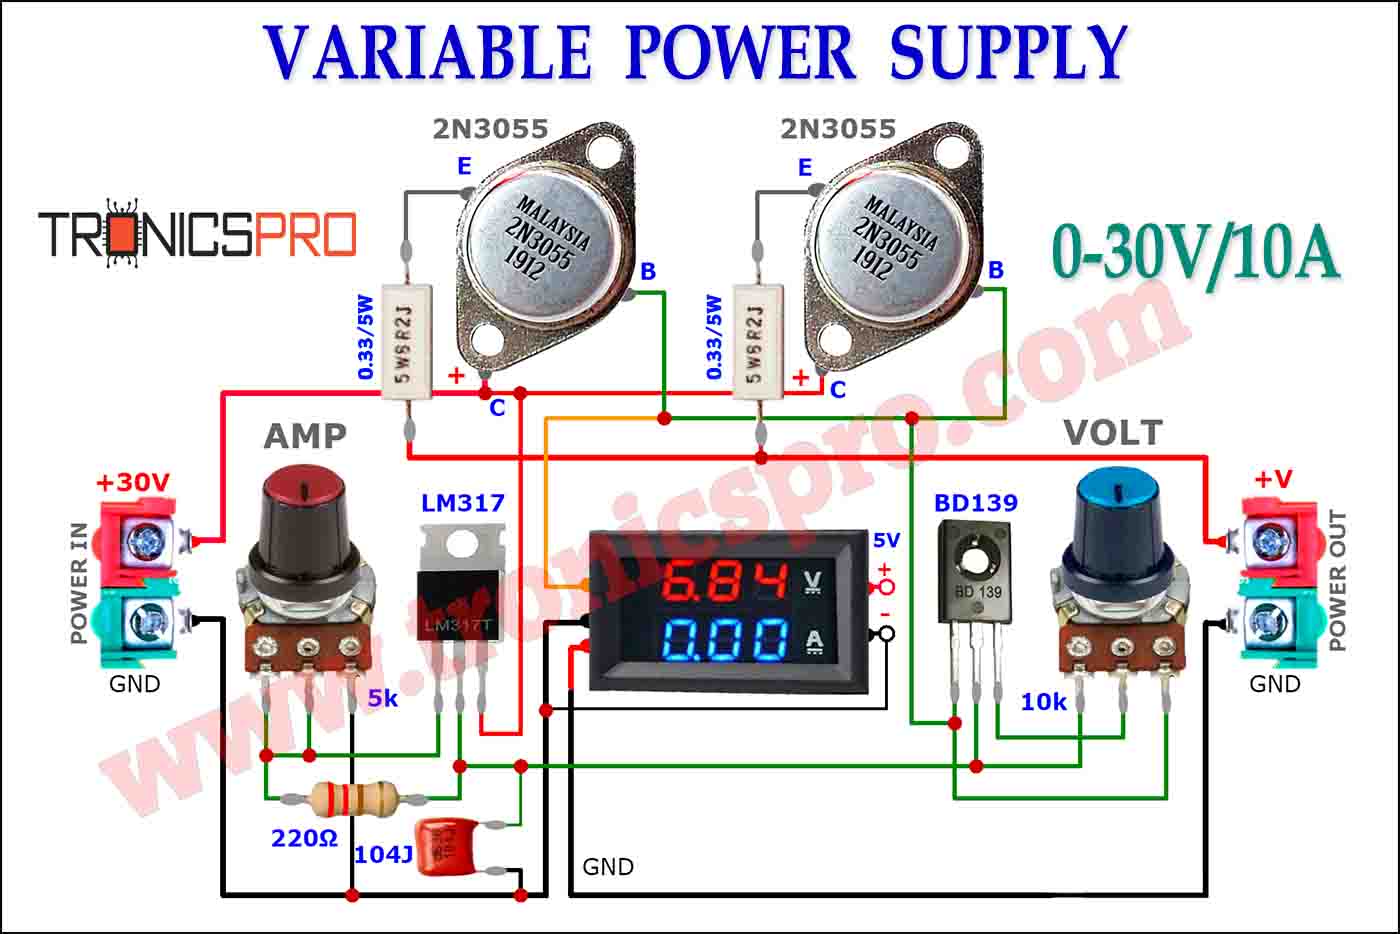 Variable Power Supply 0-30V_10A Circuit Diagram - TRONICSpro